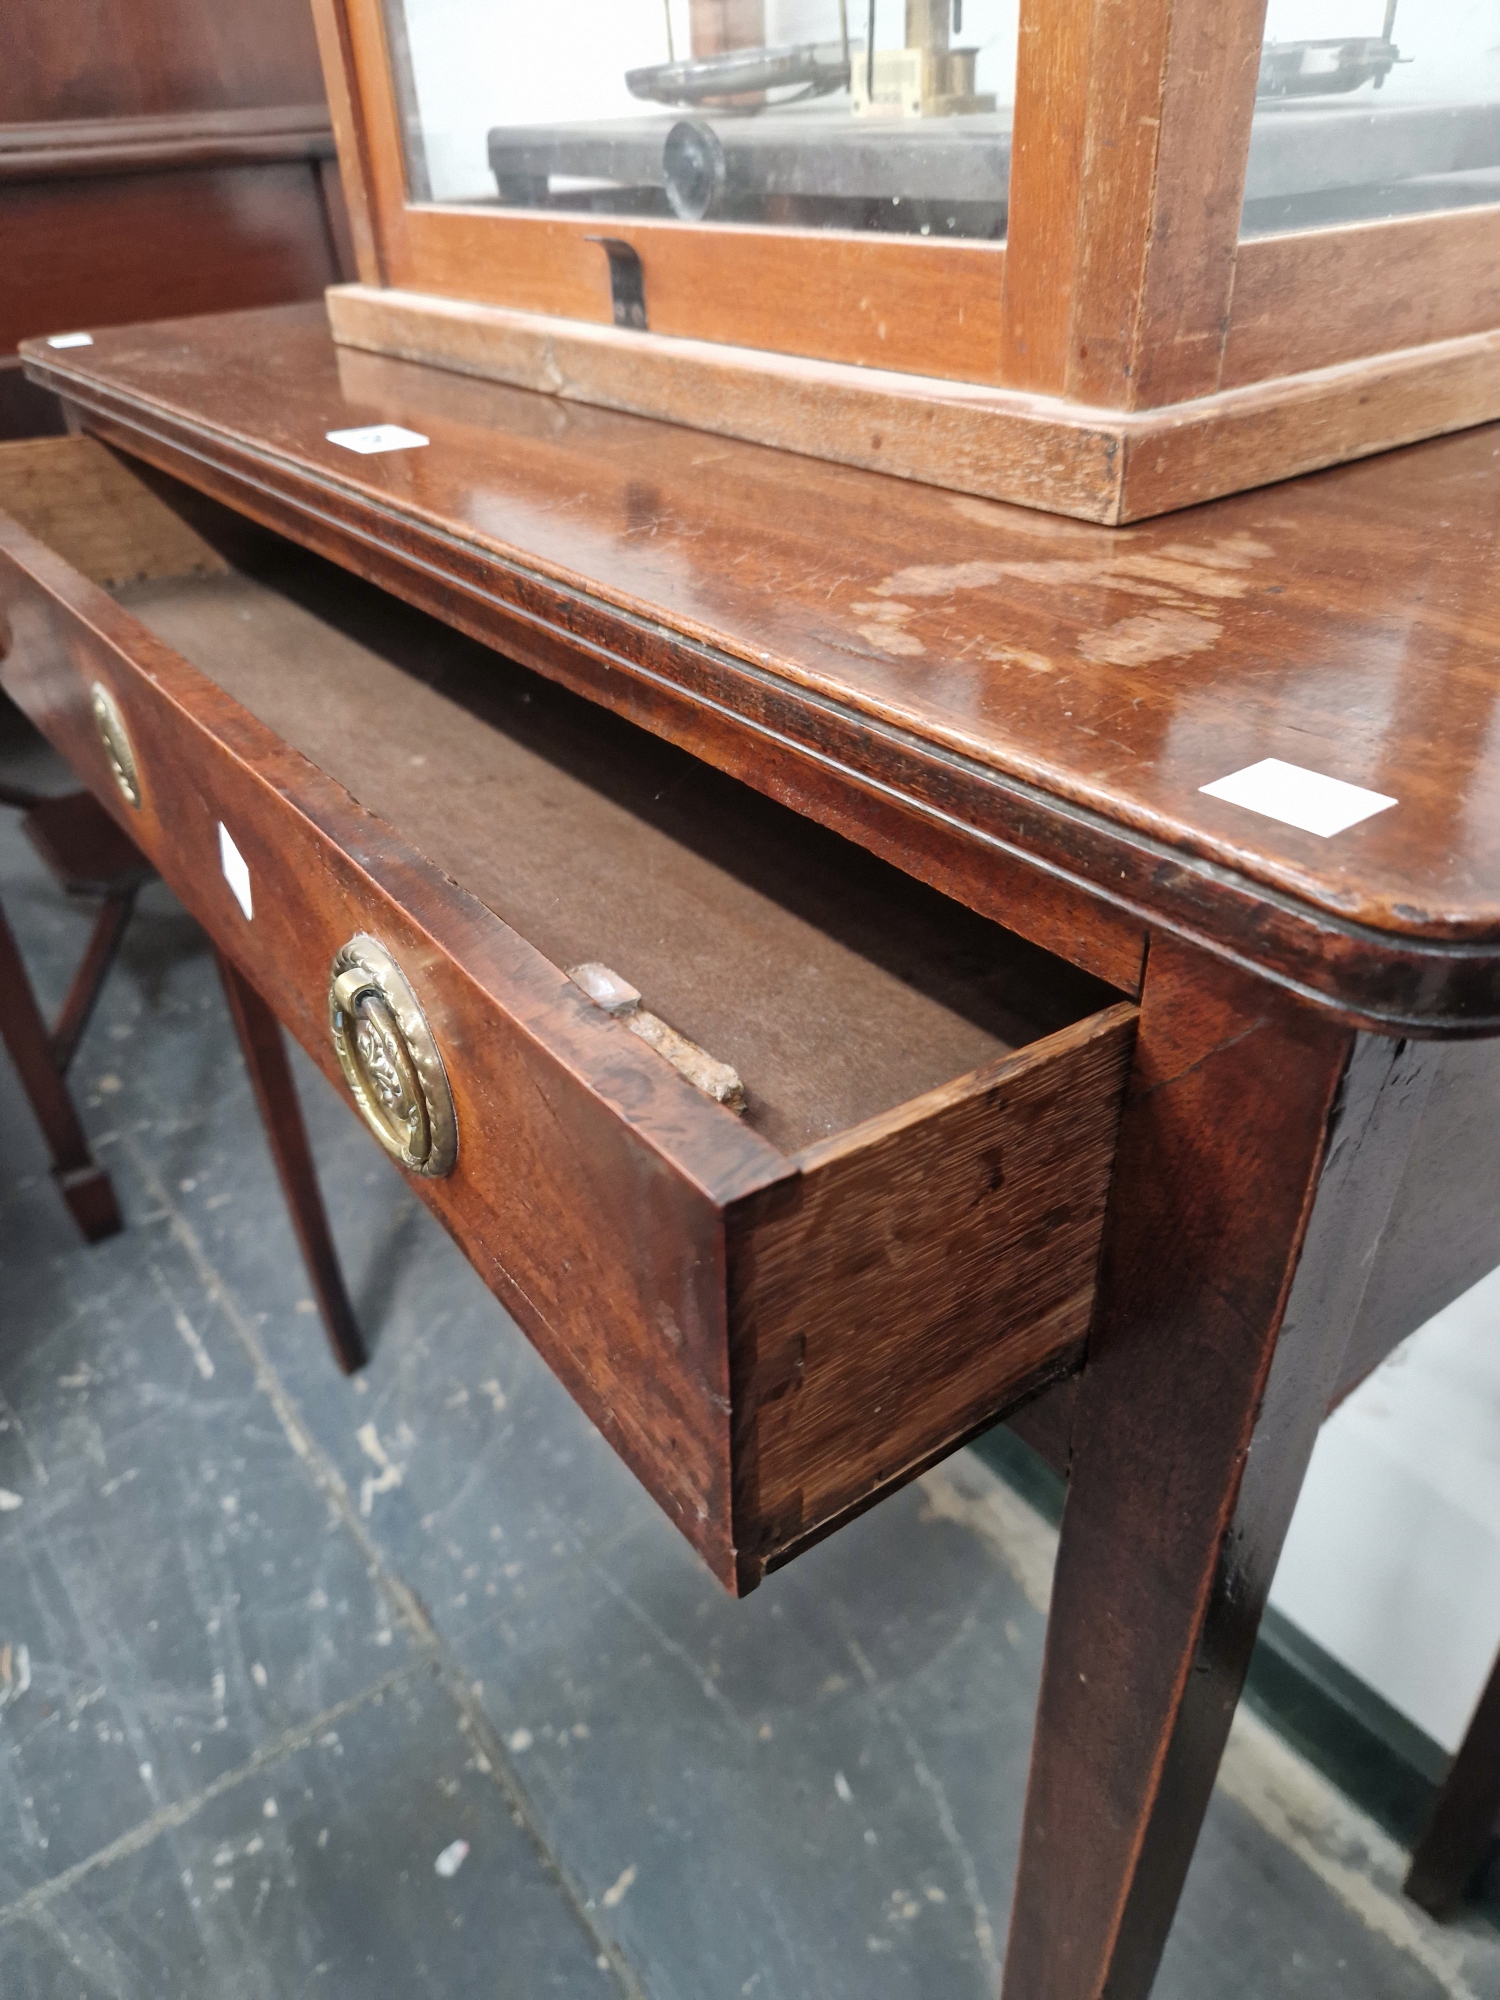 AN EARLY 19th C. MAHOGANY SIDE TABLE WITH A SINGLE DRAWER AND ON TAPERING SQUARE LEGS. W 77 x D 34.5 - Image 3 of 3